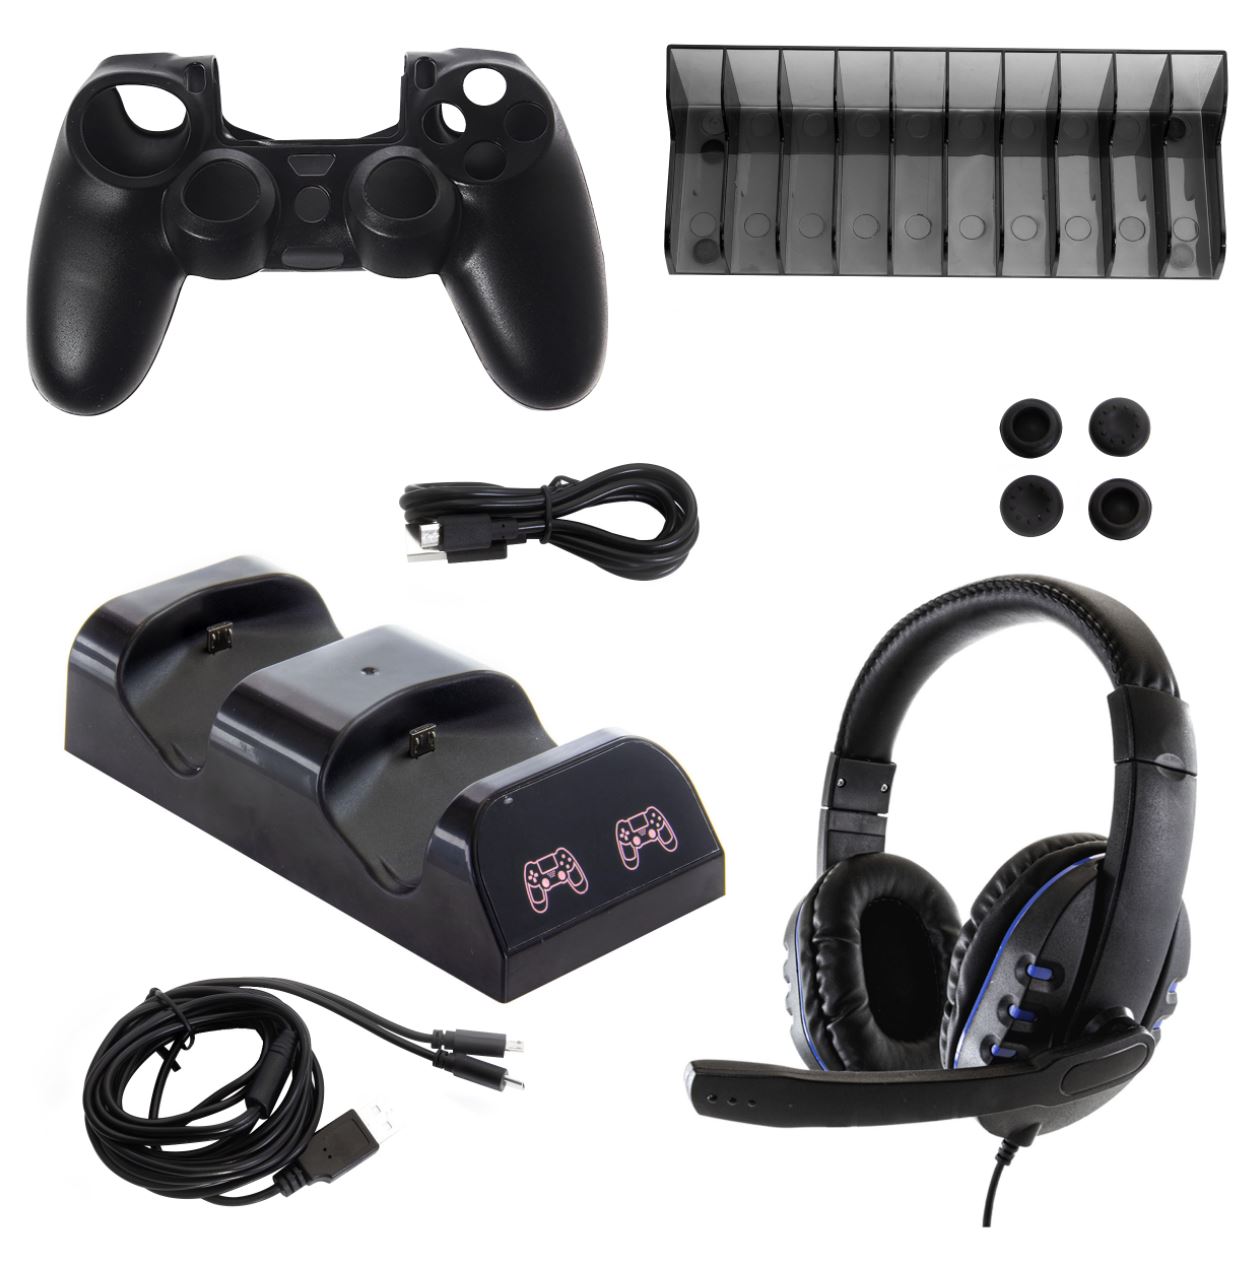 Gamefitz 10 in 1 Accessories Kit for PlayStation